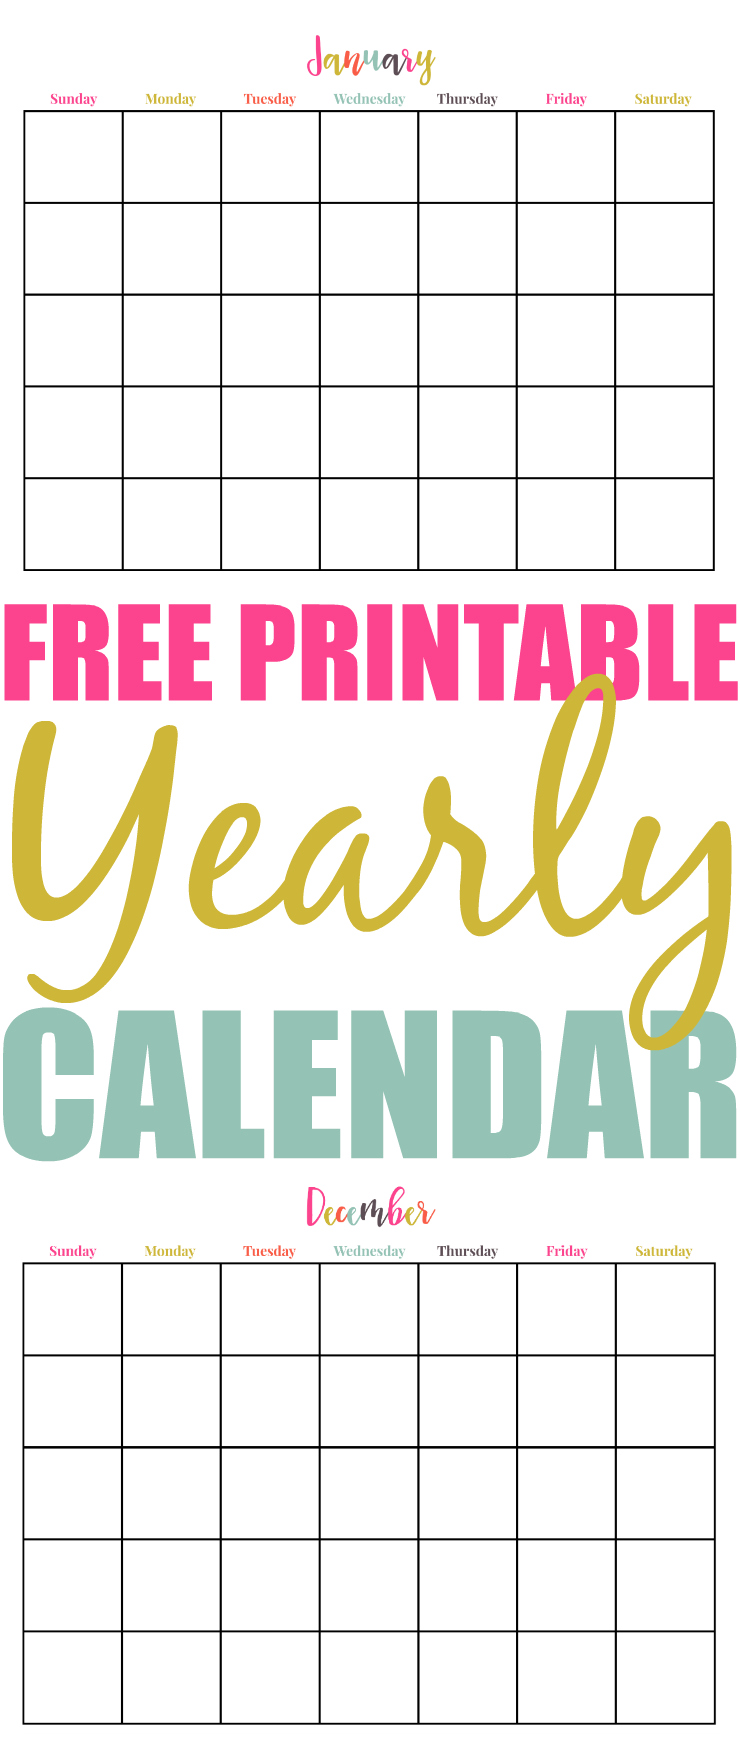  High Resolution Free Printable Yearly Calendars